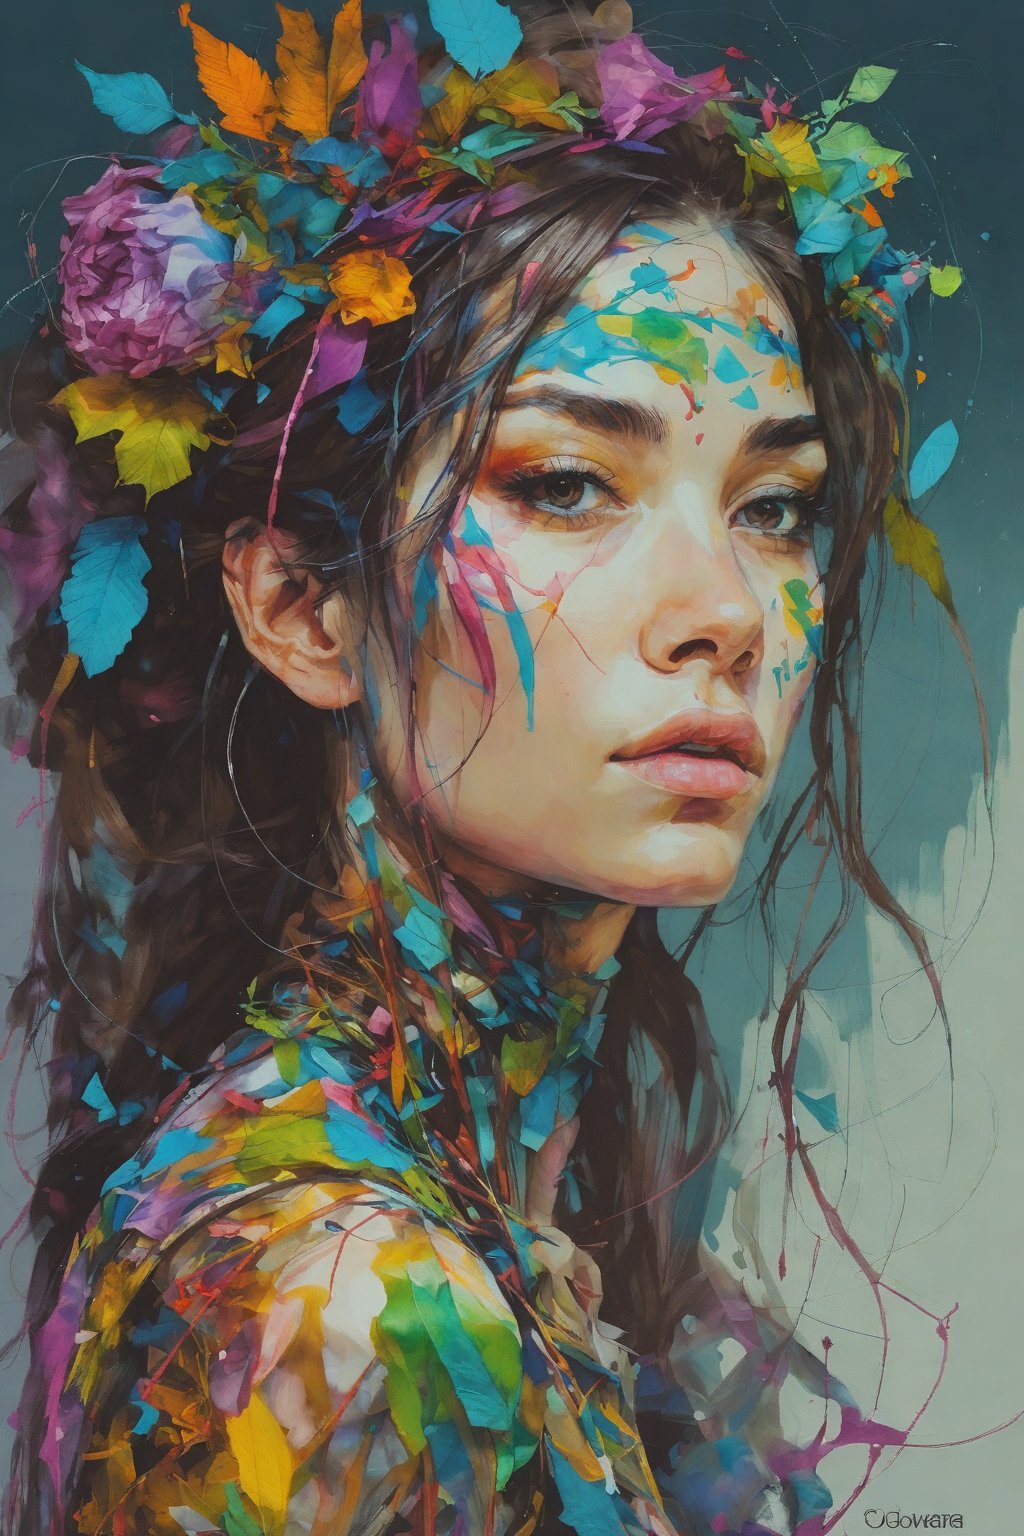 (best quality:1.2), giovani magana carne griffiths masterpiece, pretty elegant taliyah, impressionist triadic colors, rule of odds, uncontrollable chromatic aberration, abstract ambient occlusion, sfw